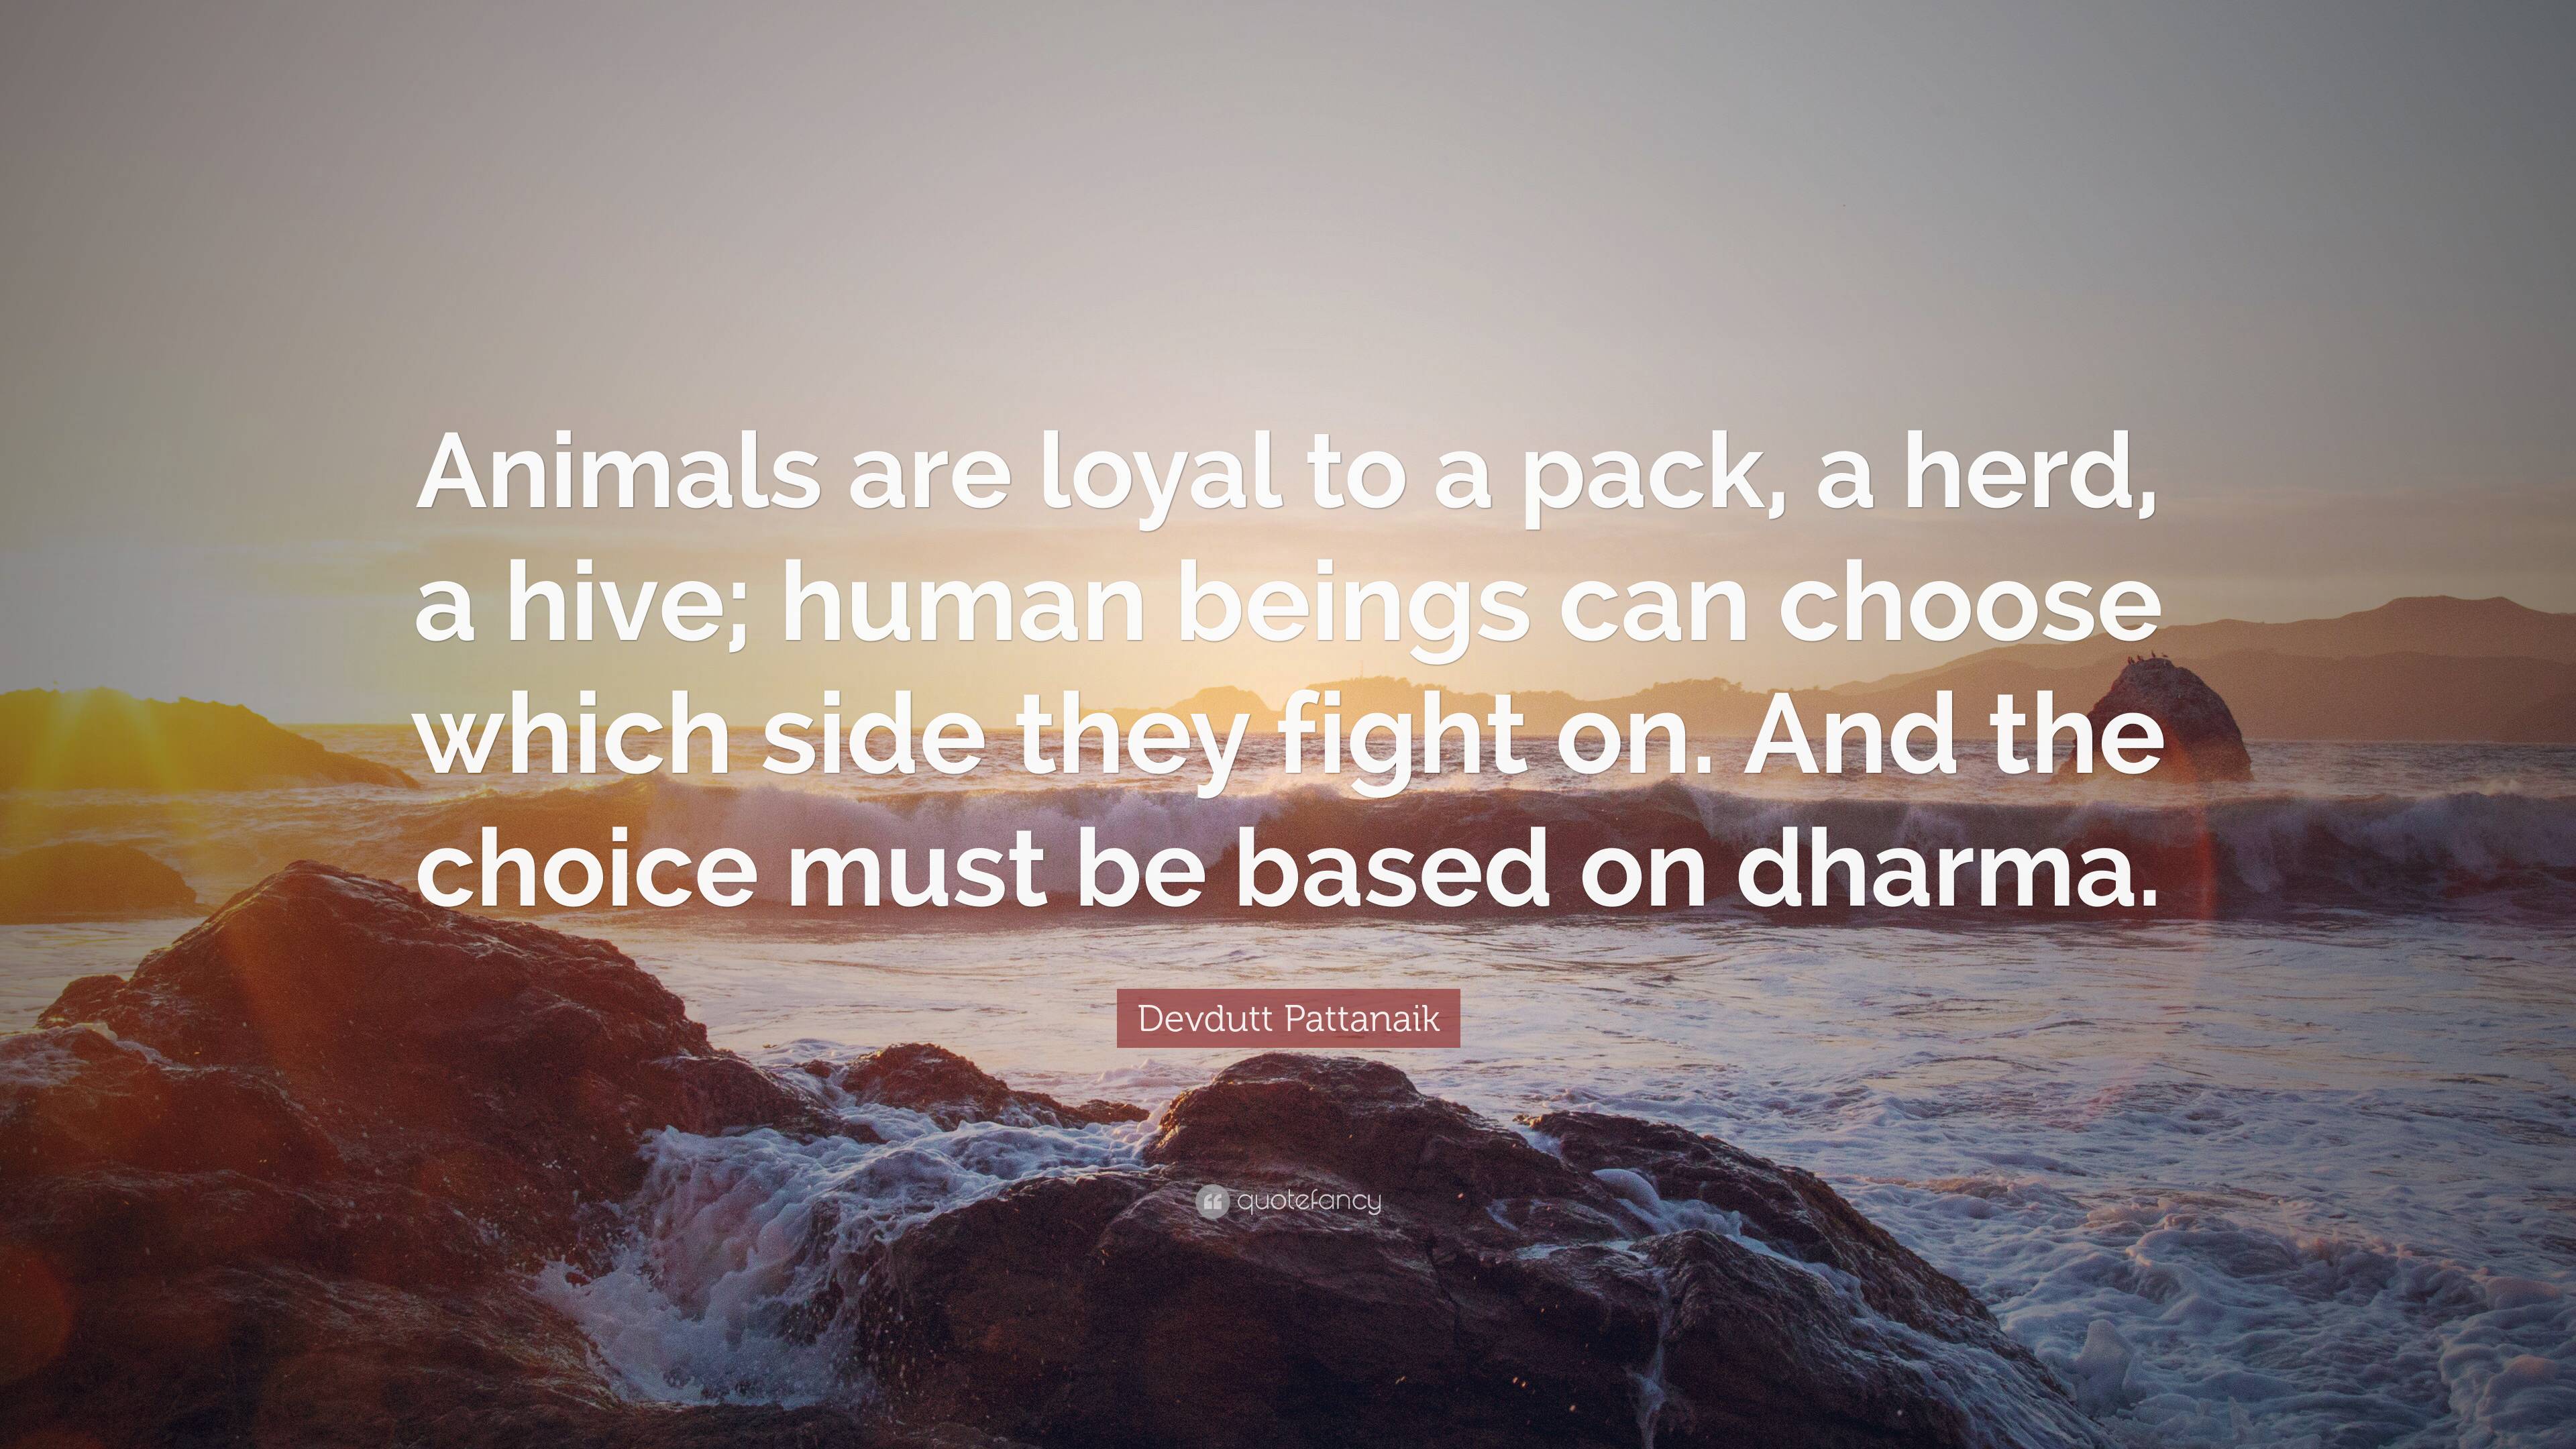 The Human Side of Pack Animals